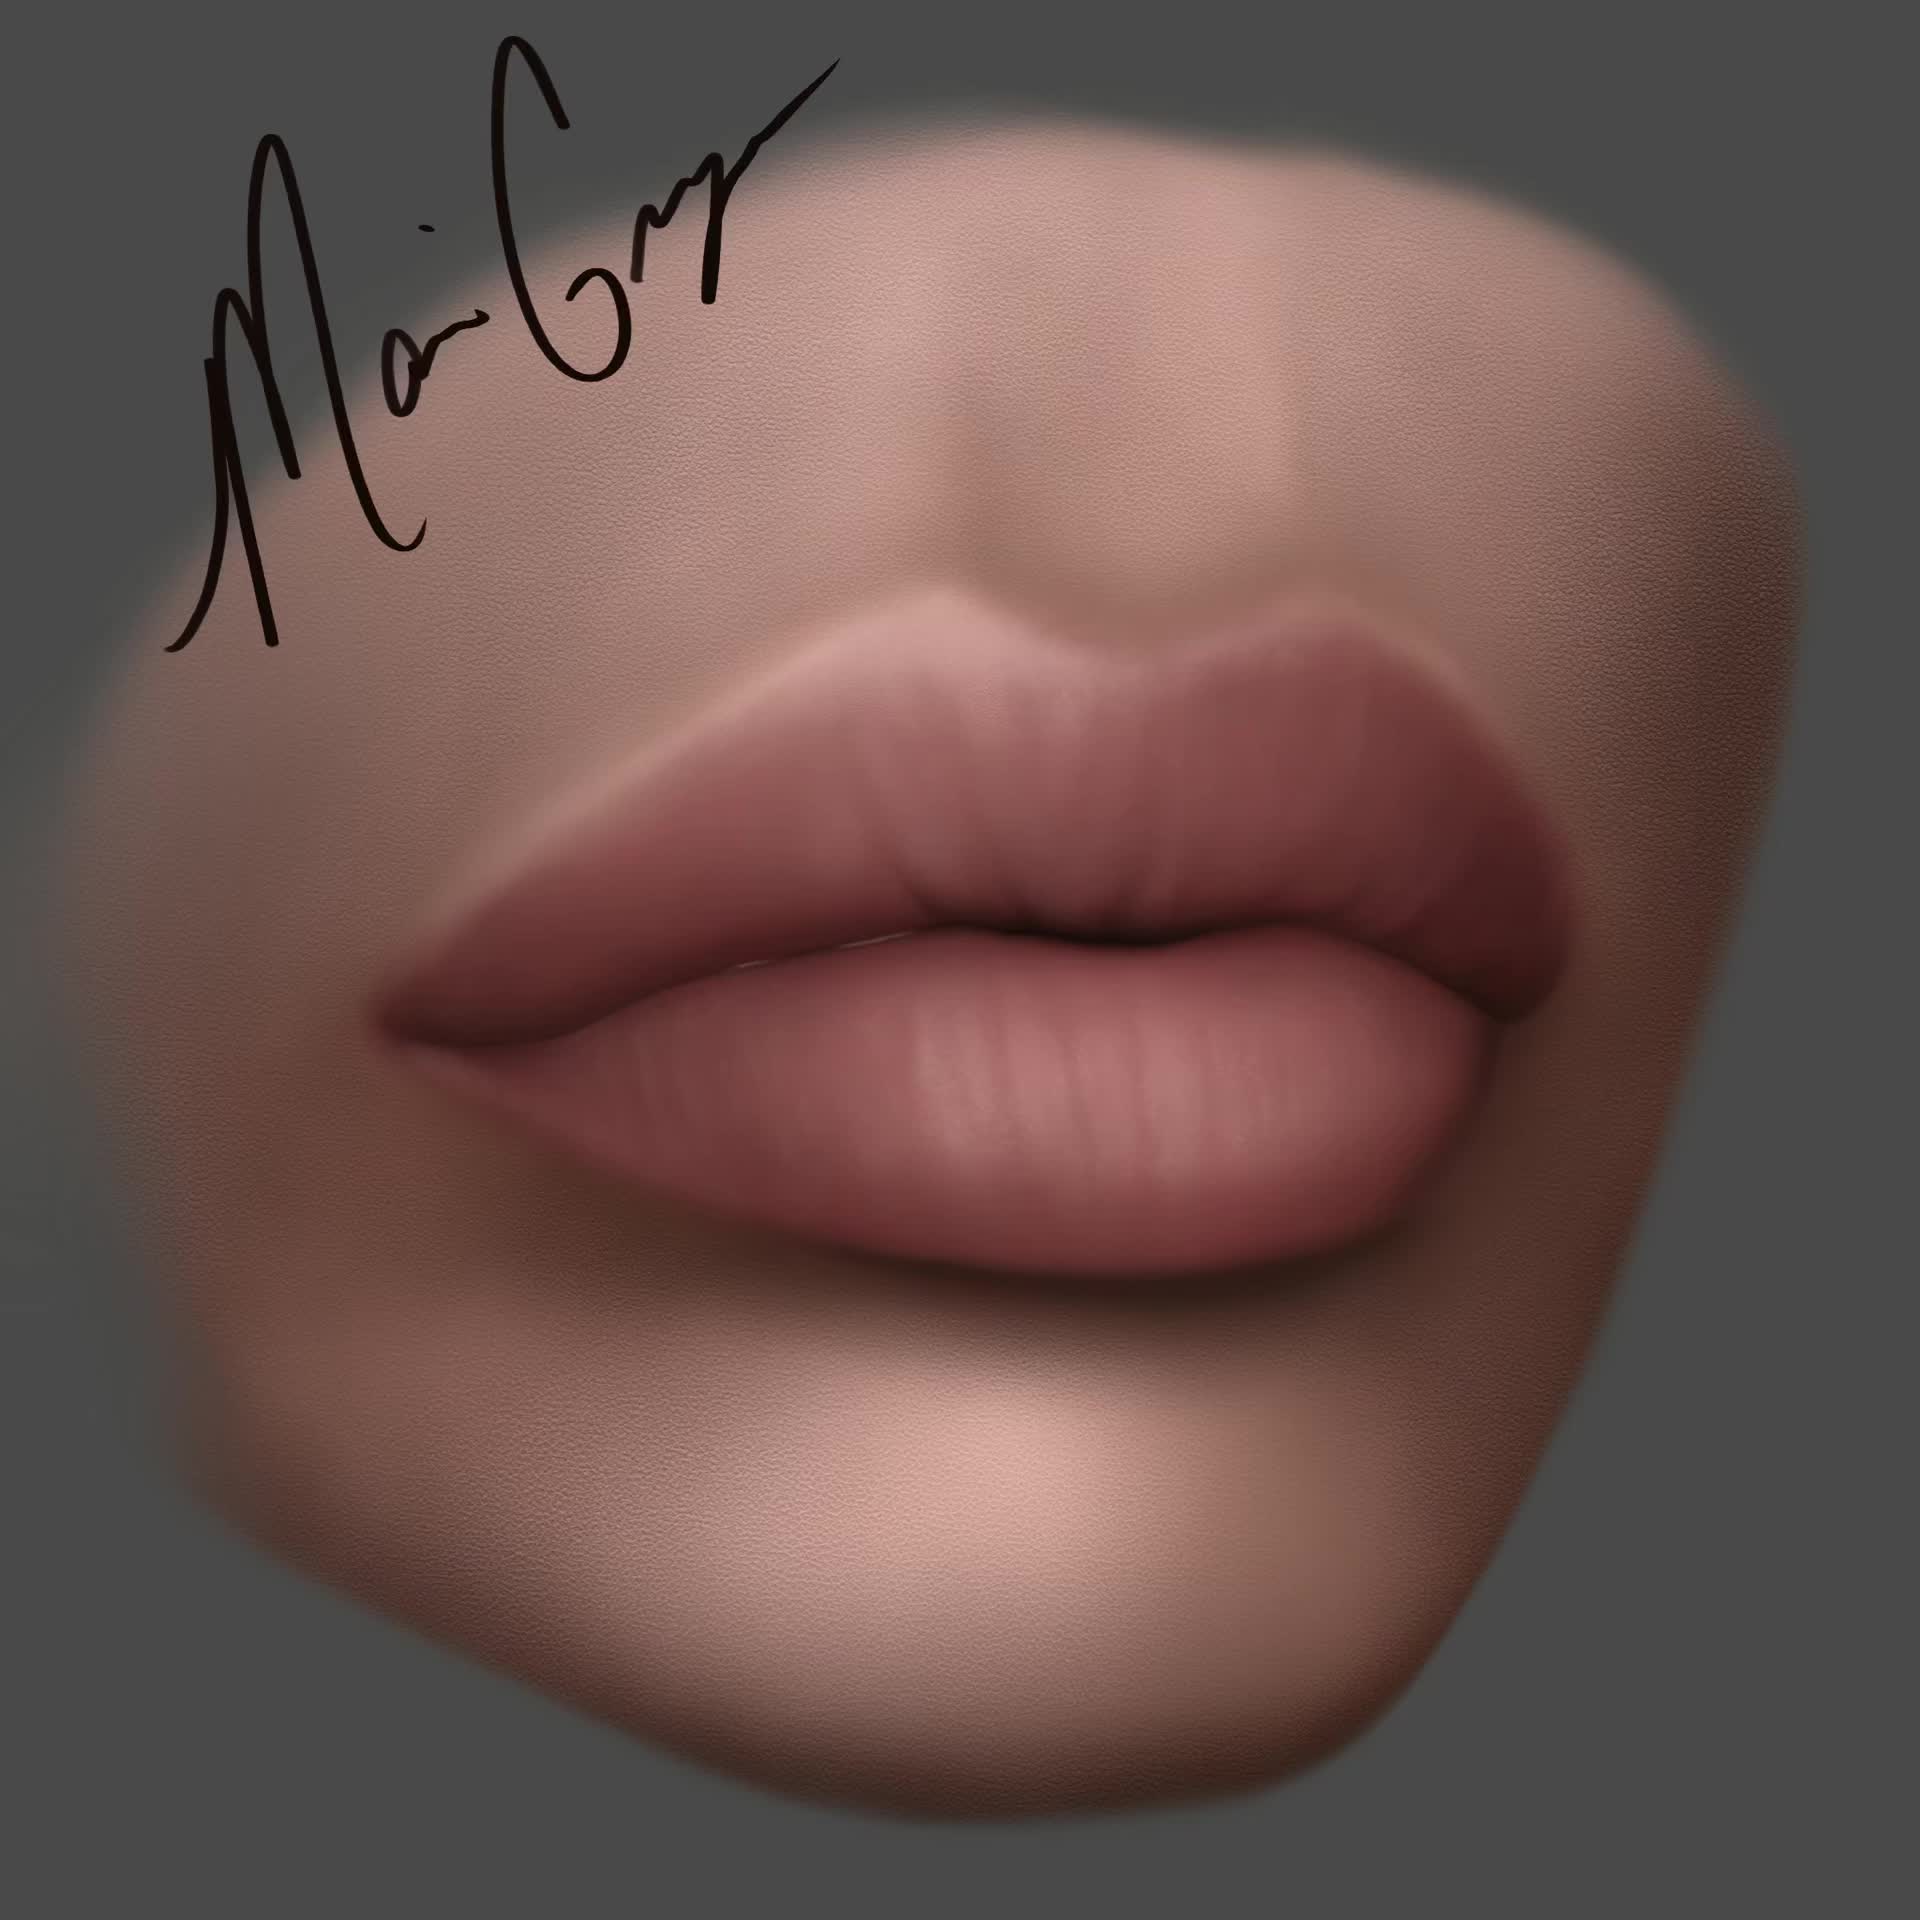 Painting Lips In Procreate